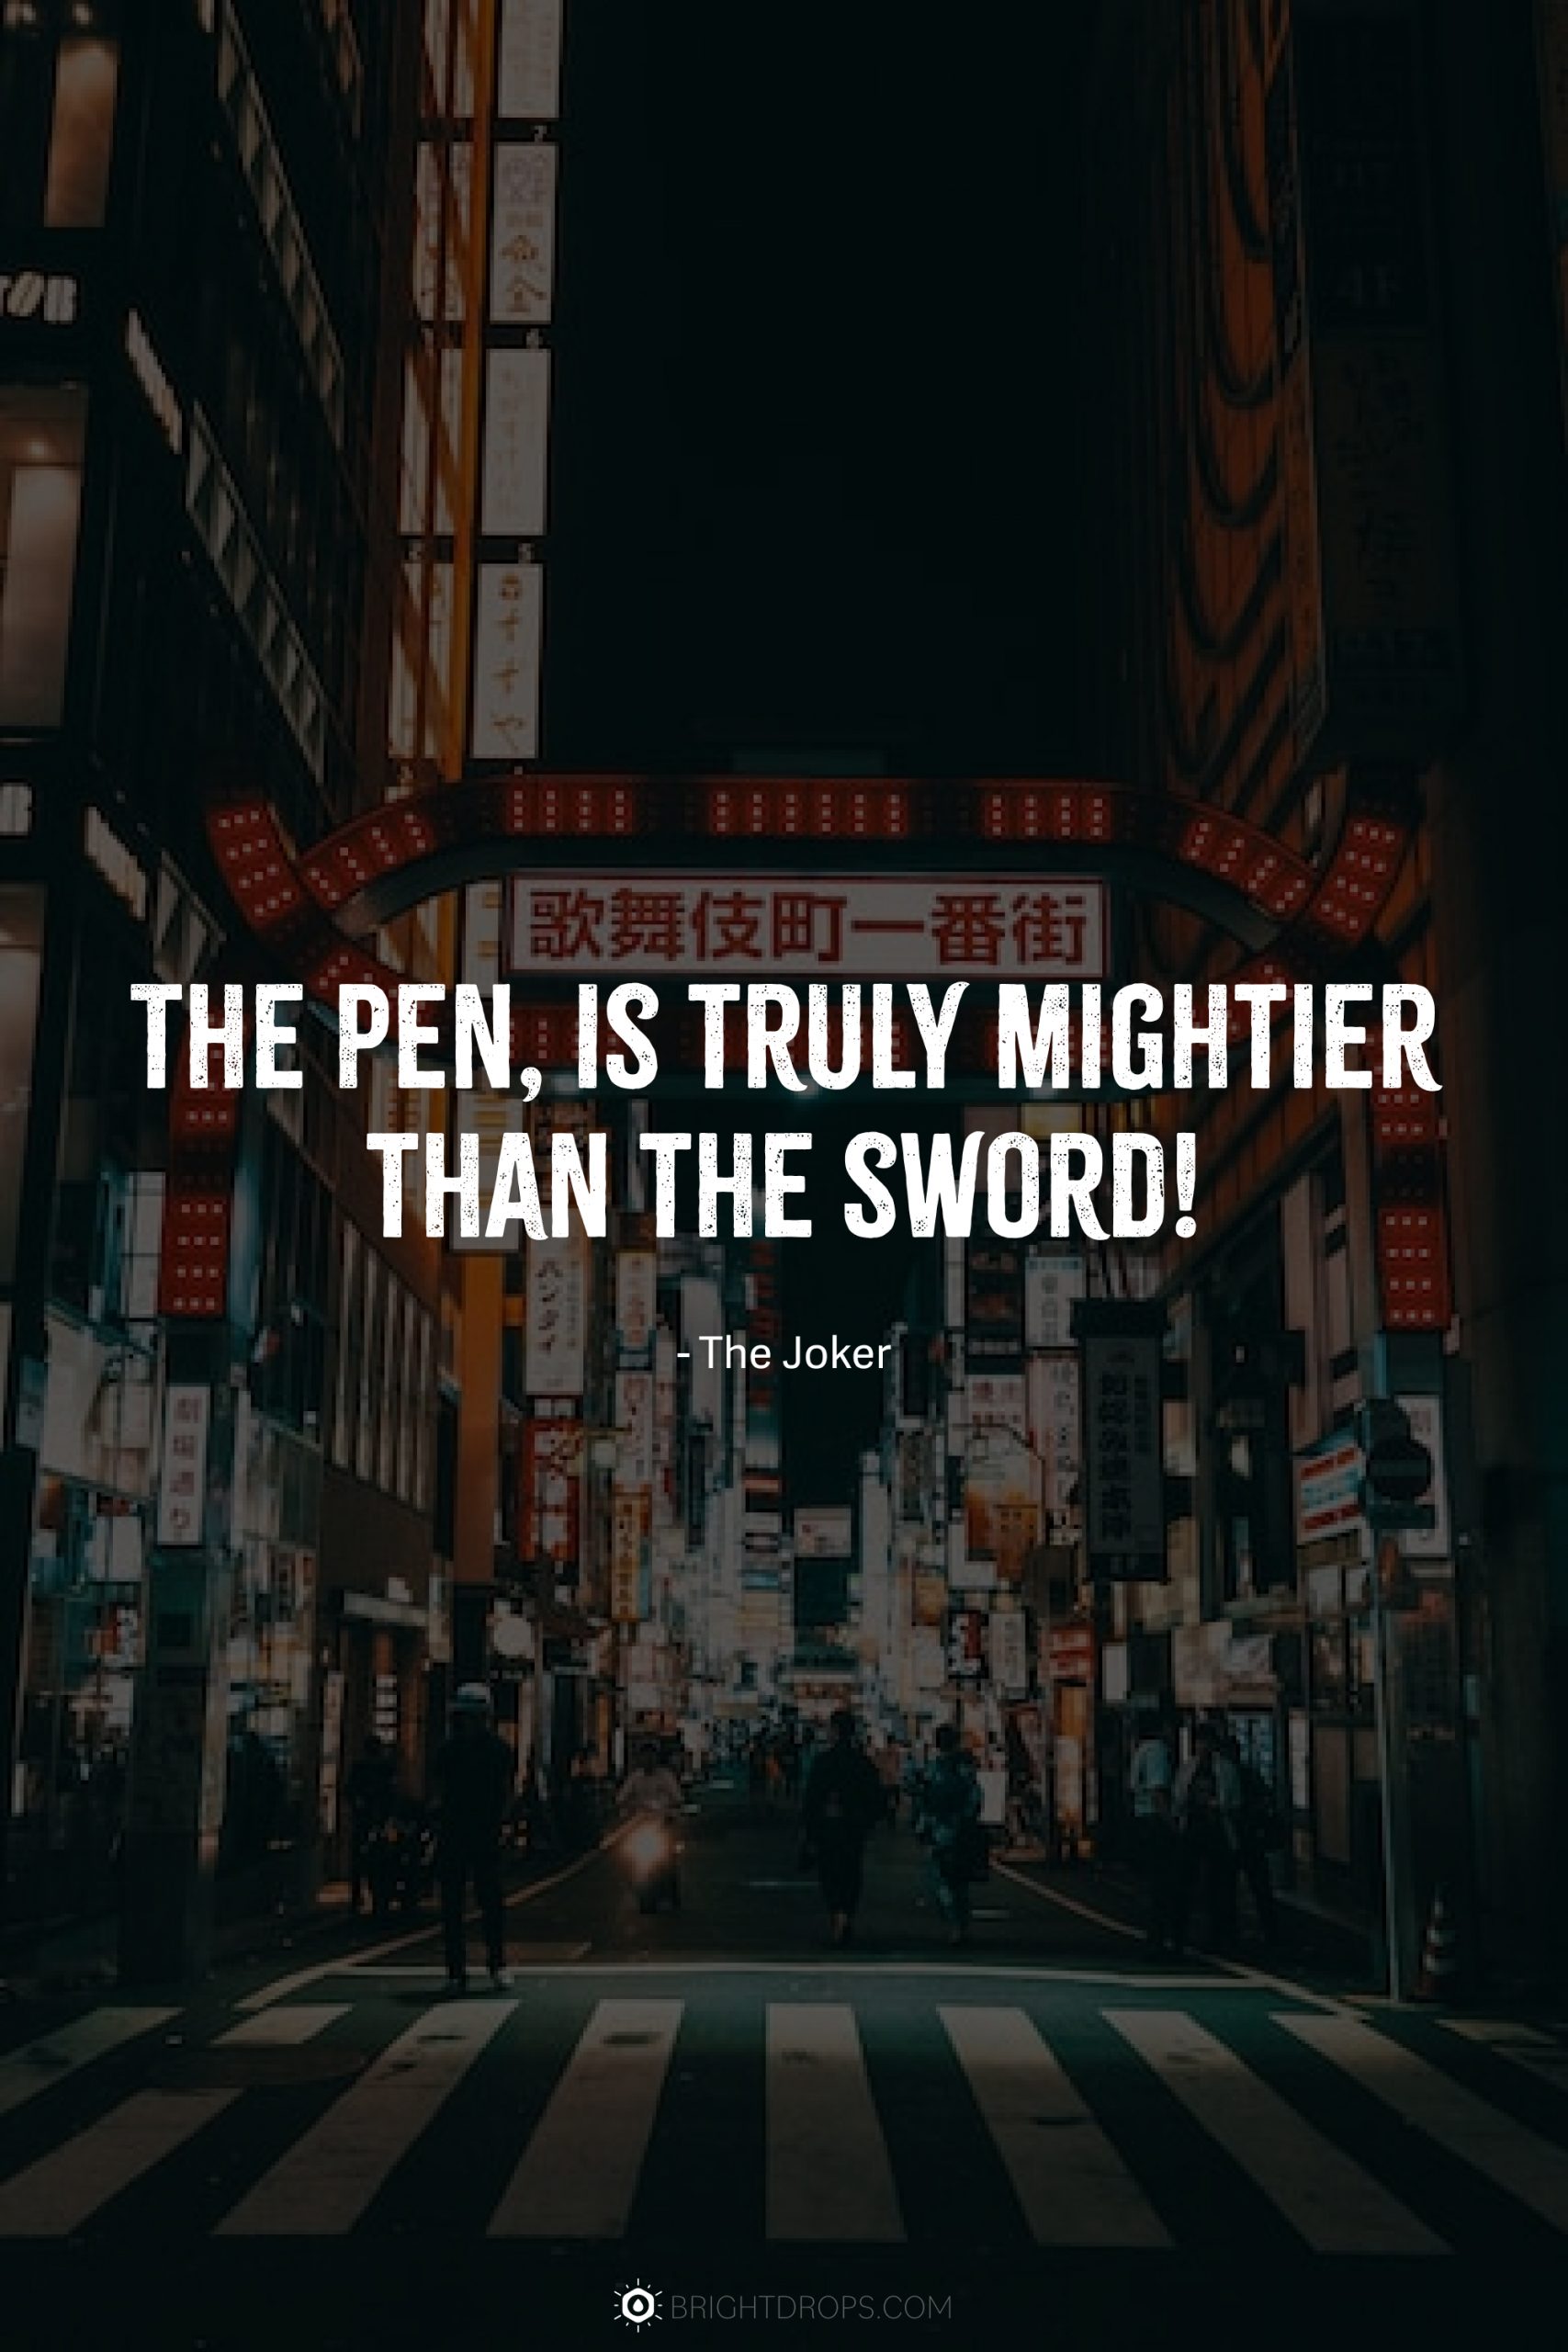 The pen, is truly mightier than the sword!